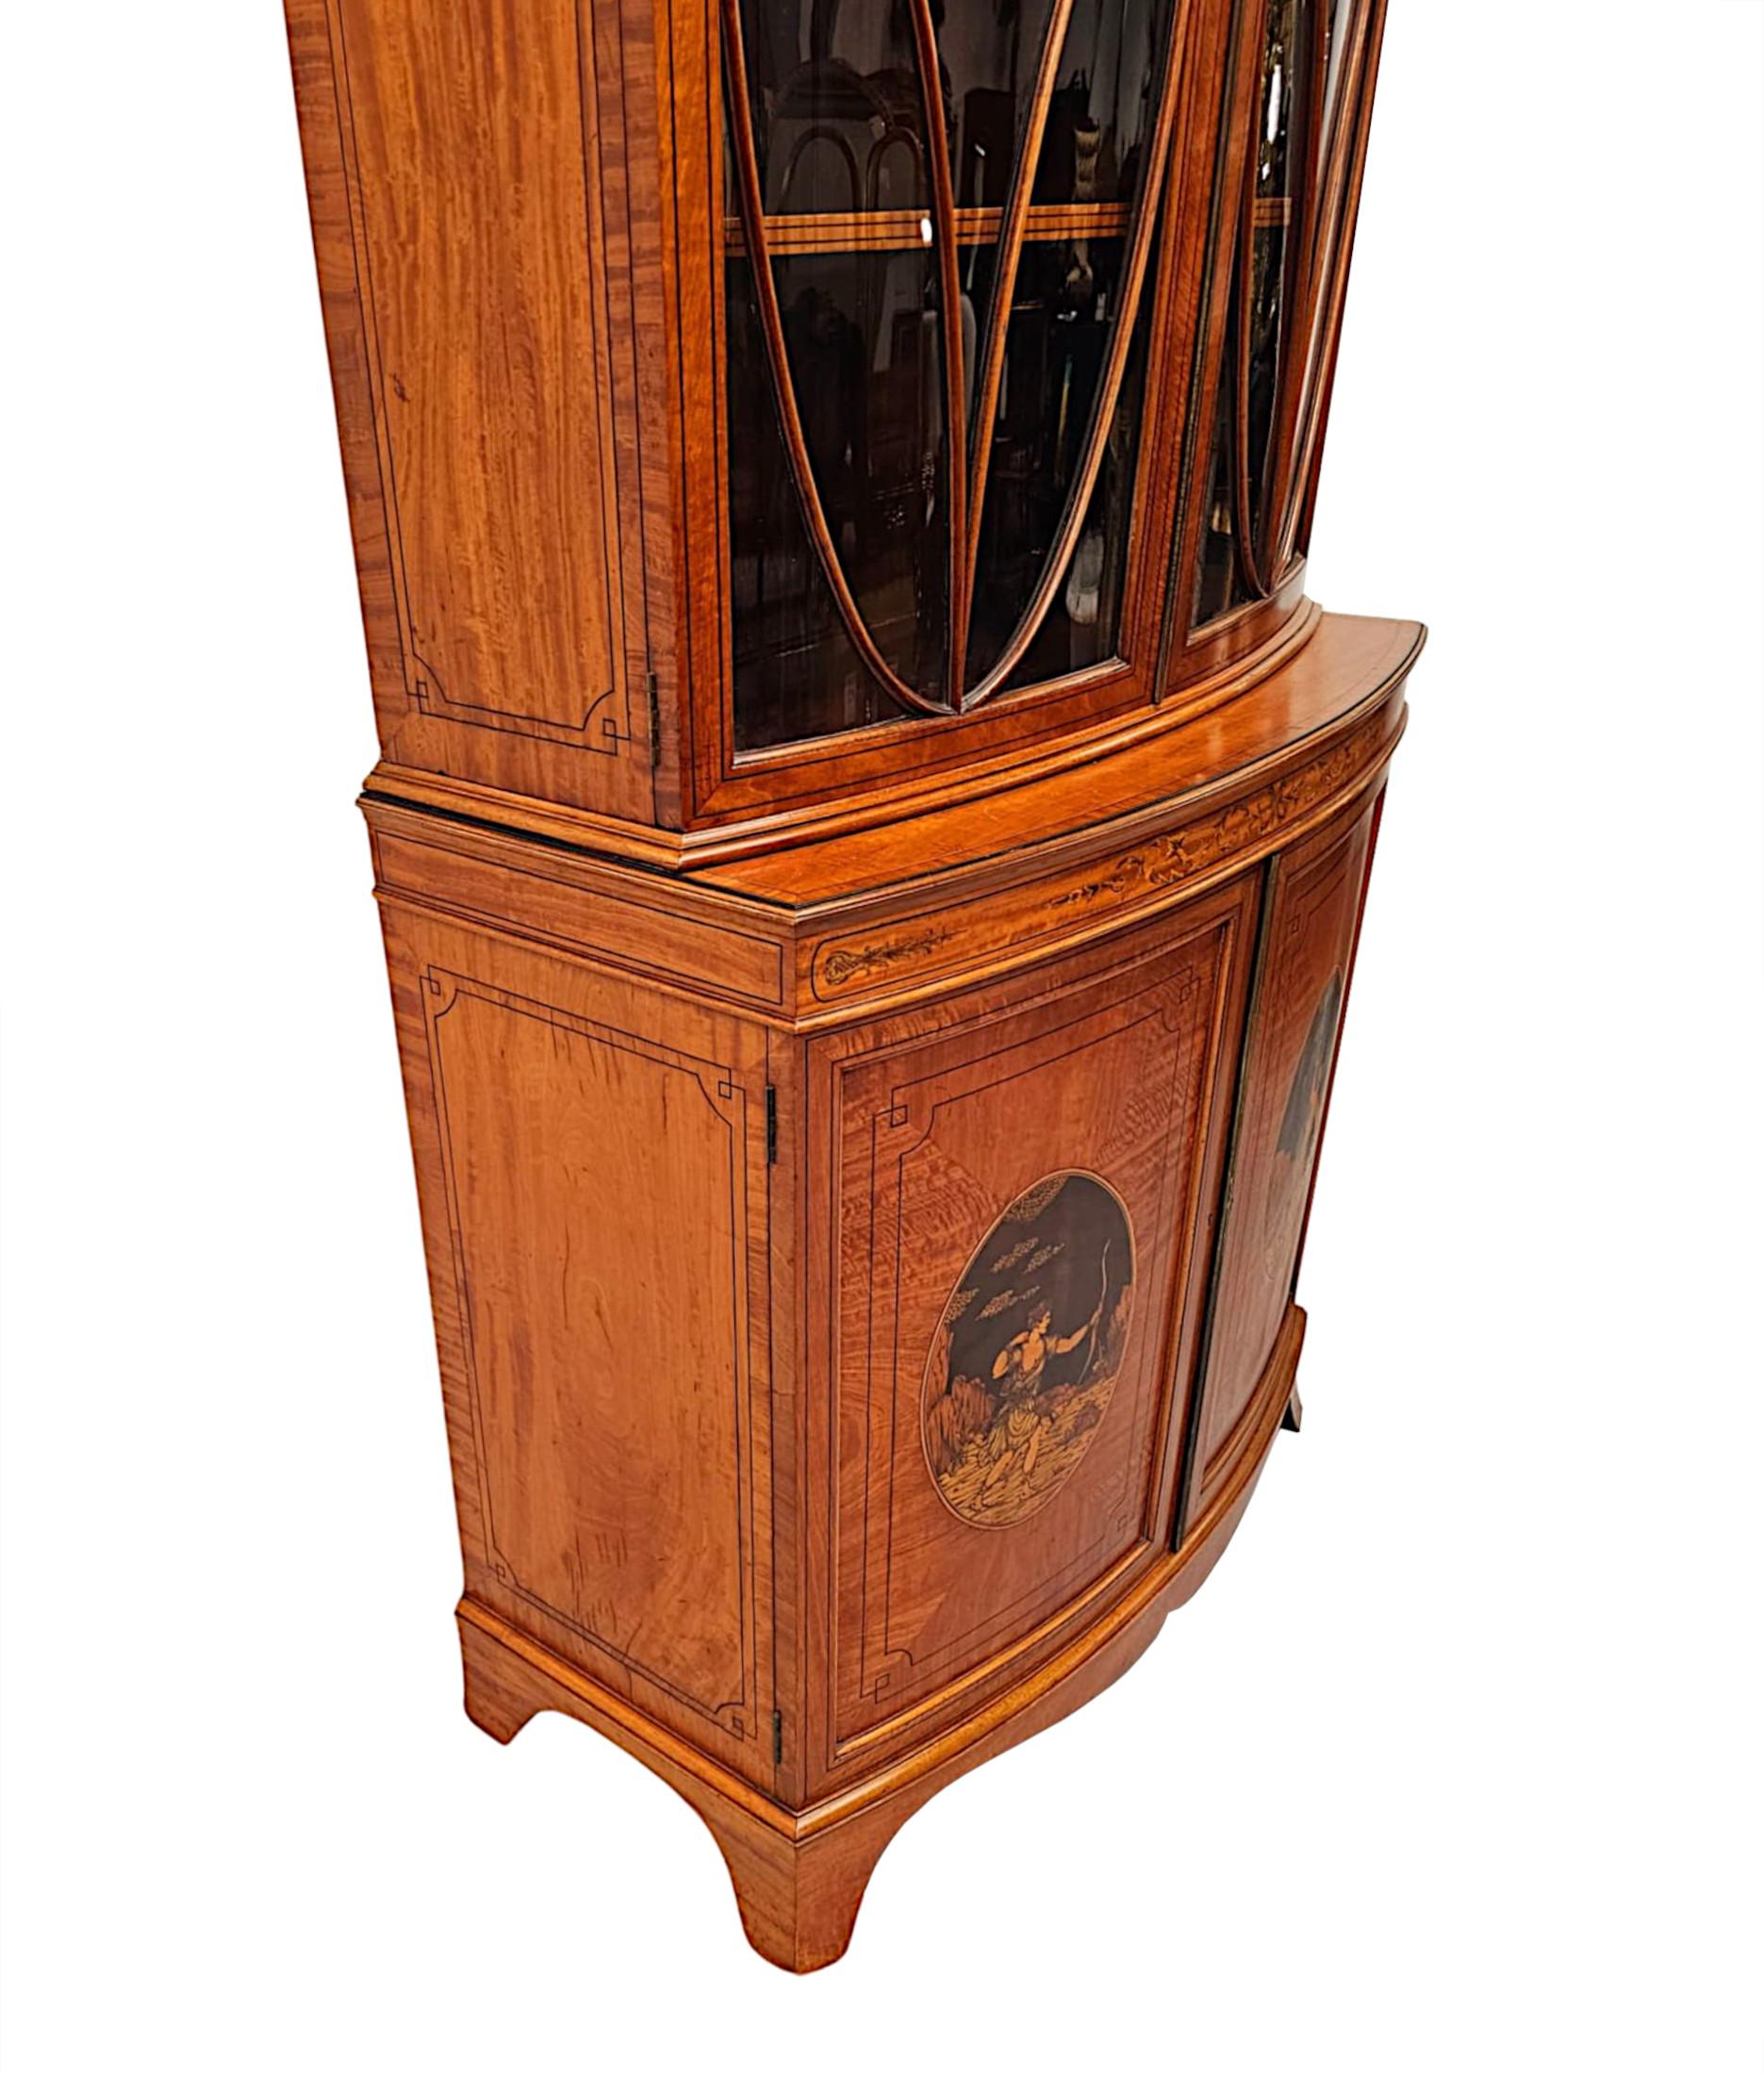 A  Fine Edwardian Marquetry Inlaid Bowfronted Bookcase afterf Edward and Roberts For Sale 5